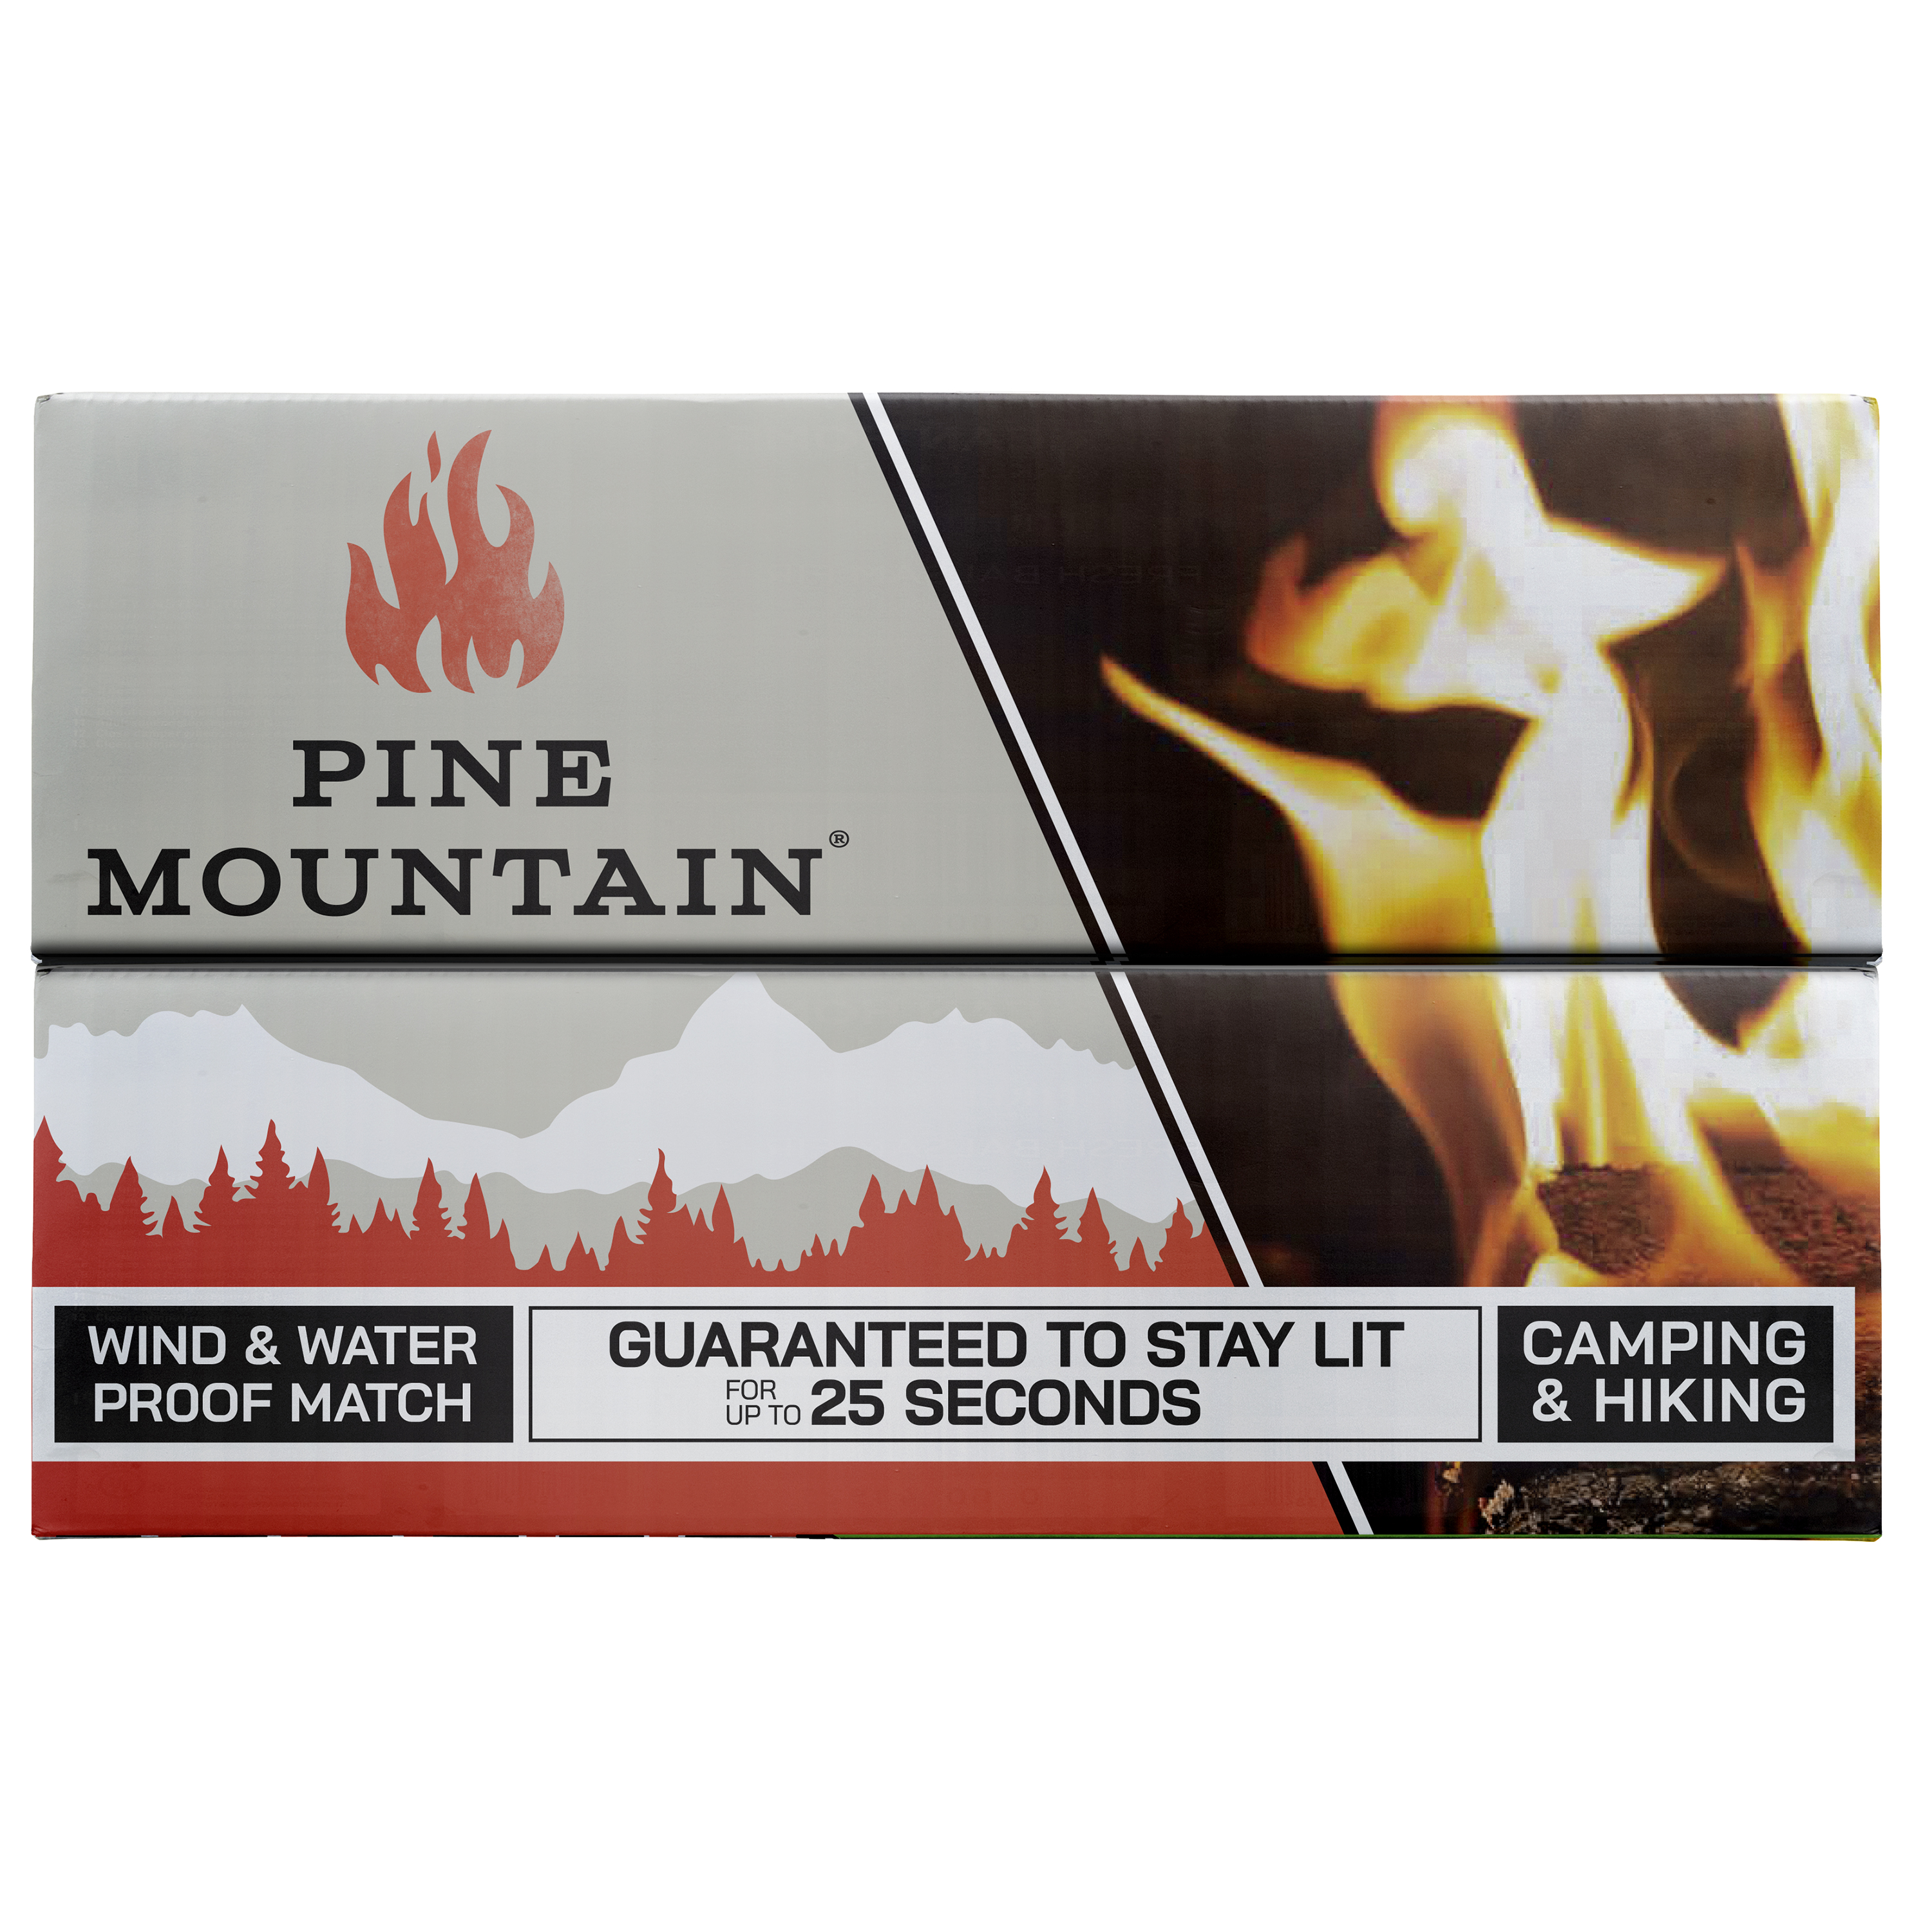 Pine Mountain Weatherproof Match, Match for Extreme Conditions, 25 Count, Tan and Red - image 5 of 5